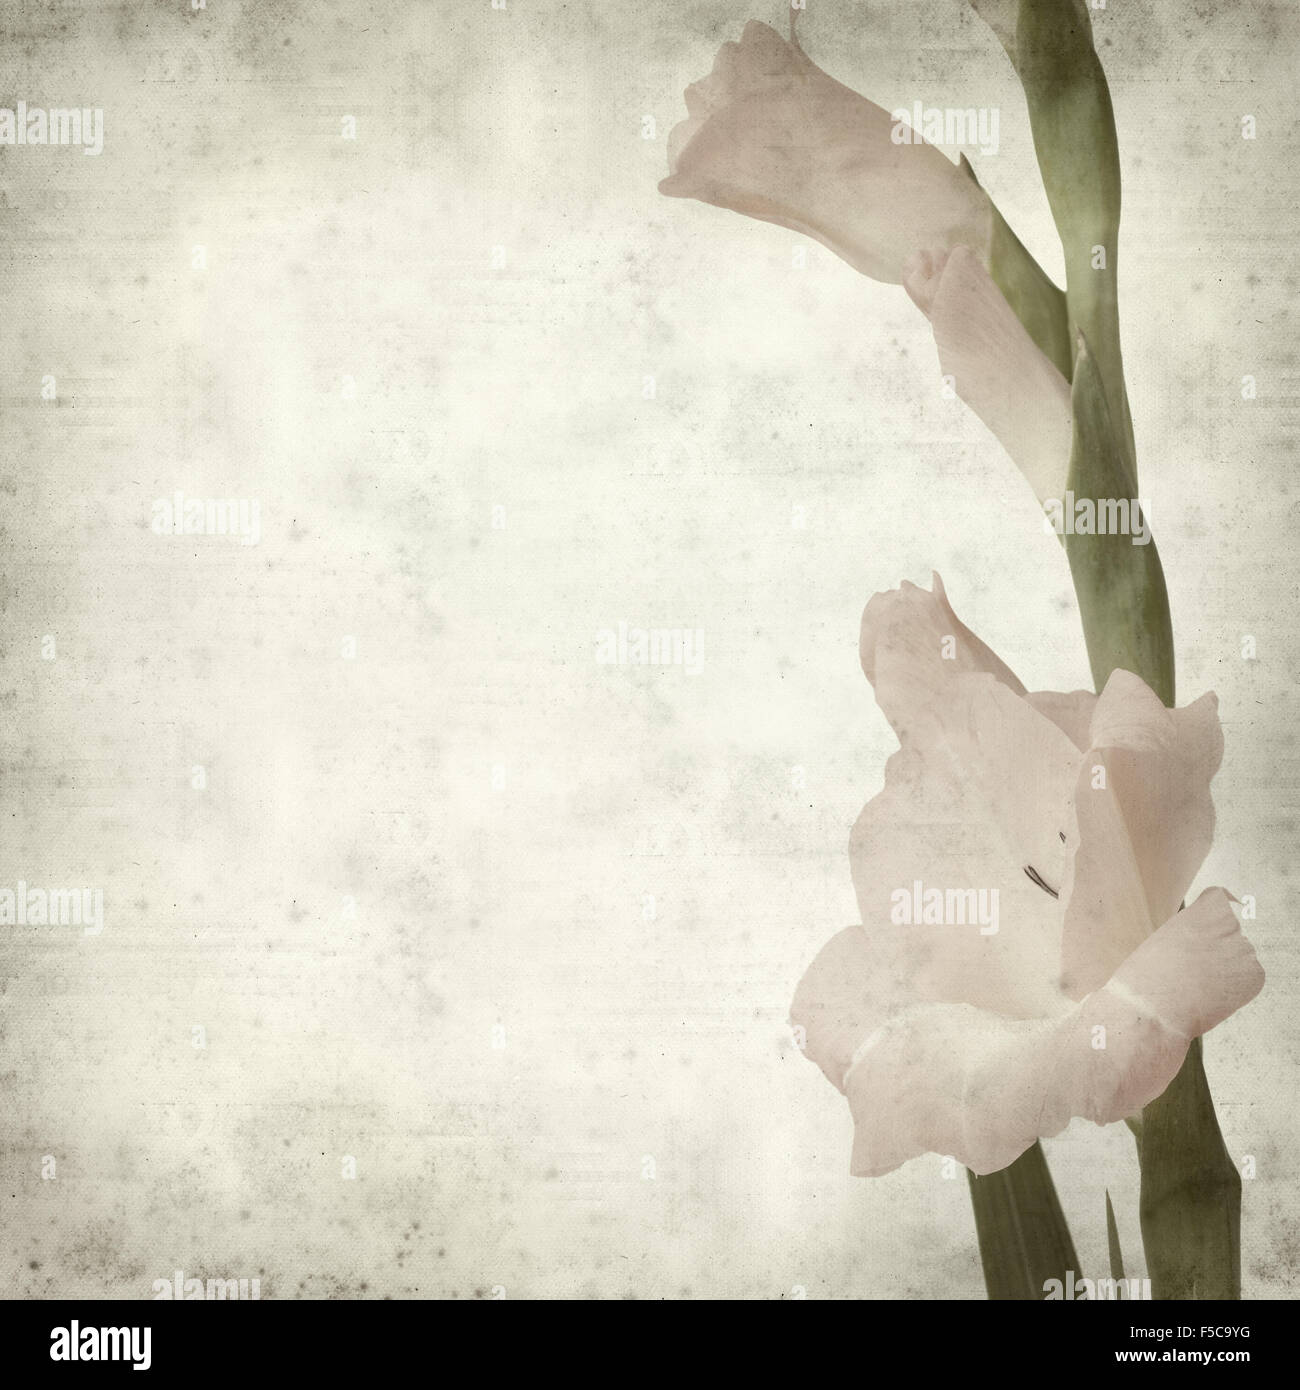 textured old paper background with pale gladiols flowering spike Stock Photo